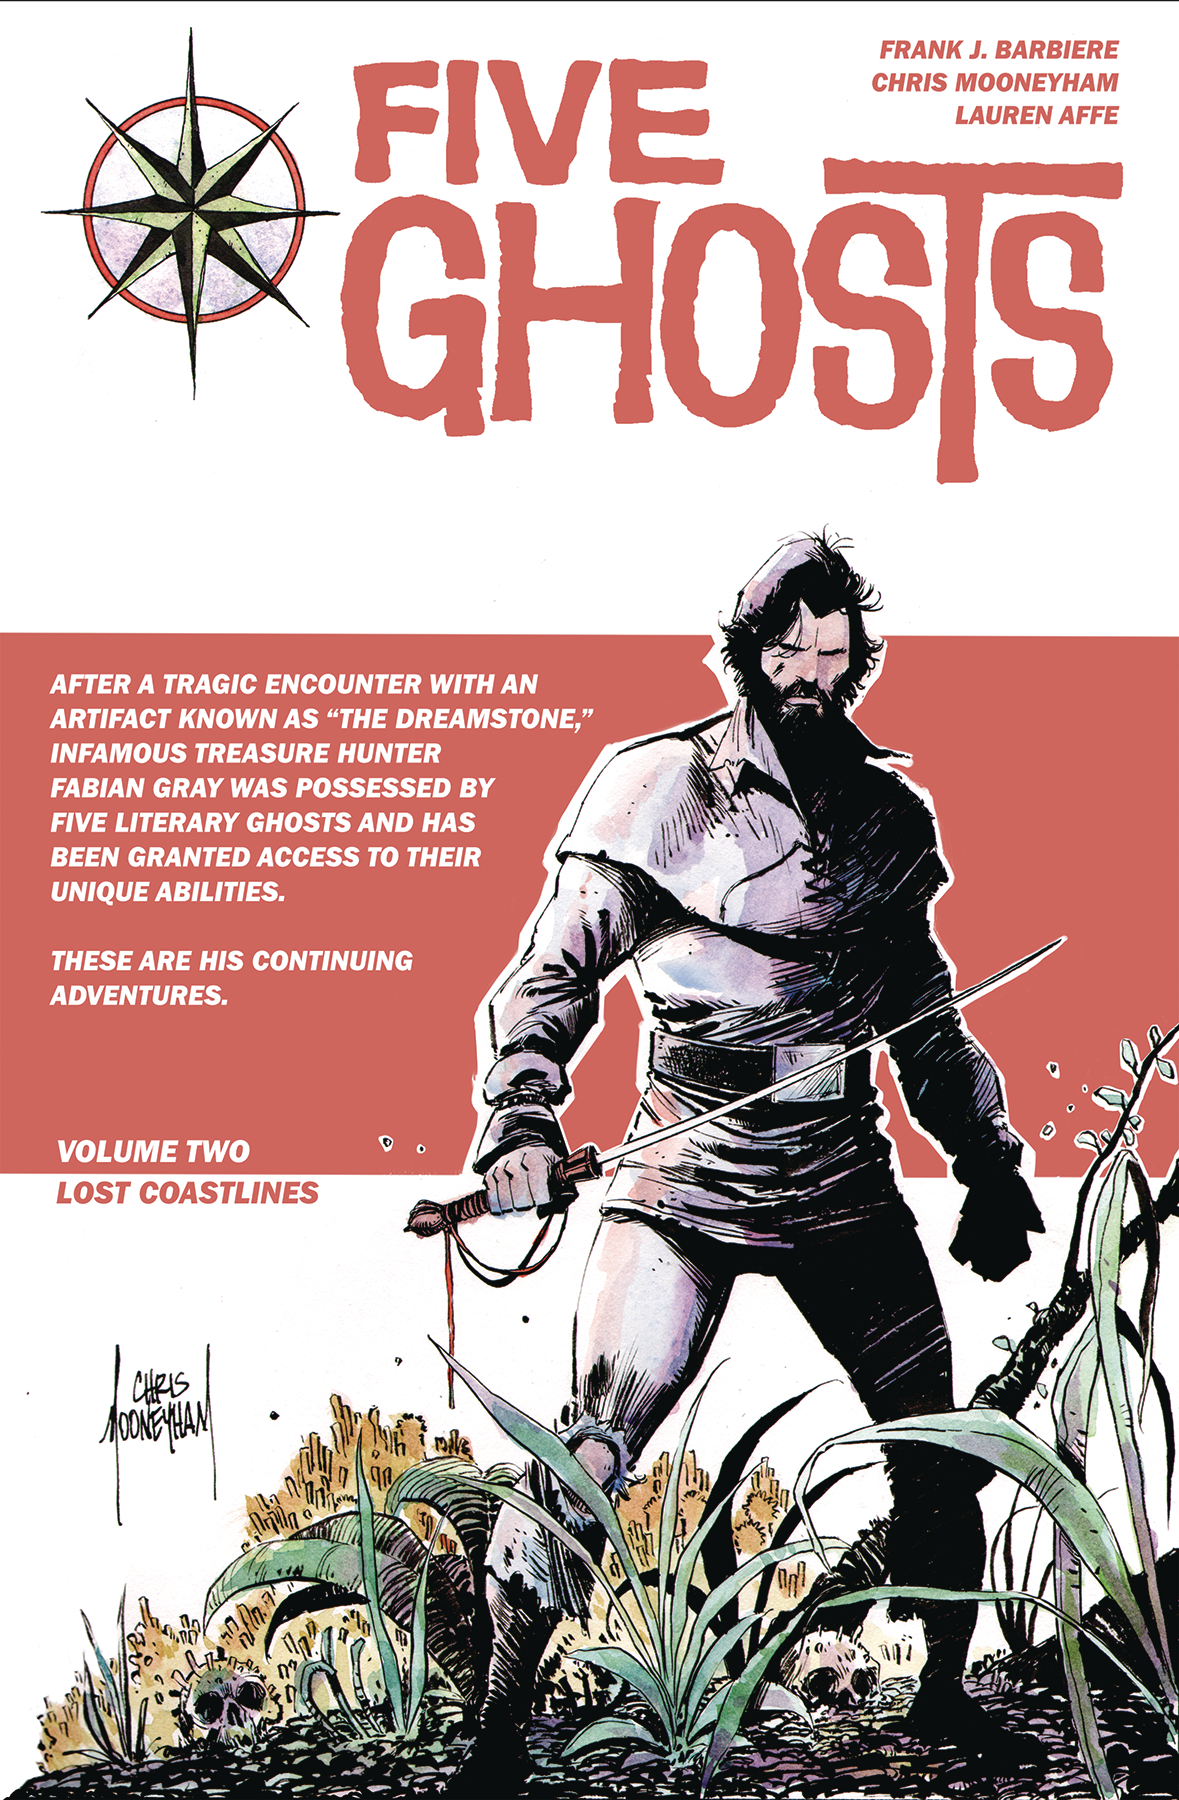 ghost graphic novel book